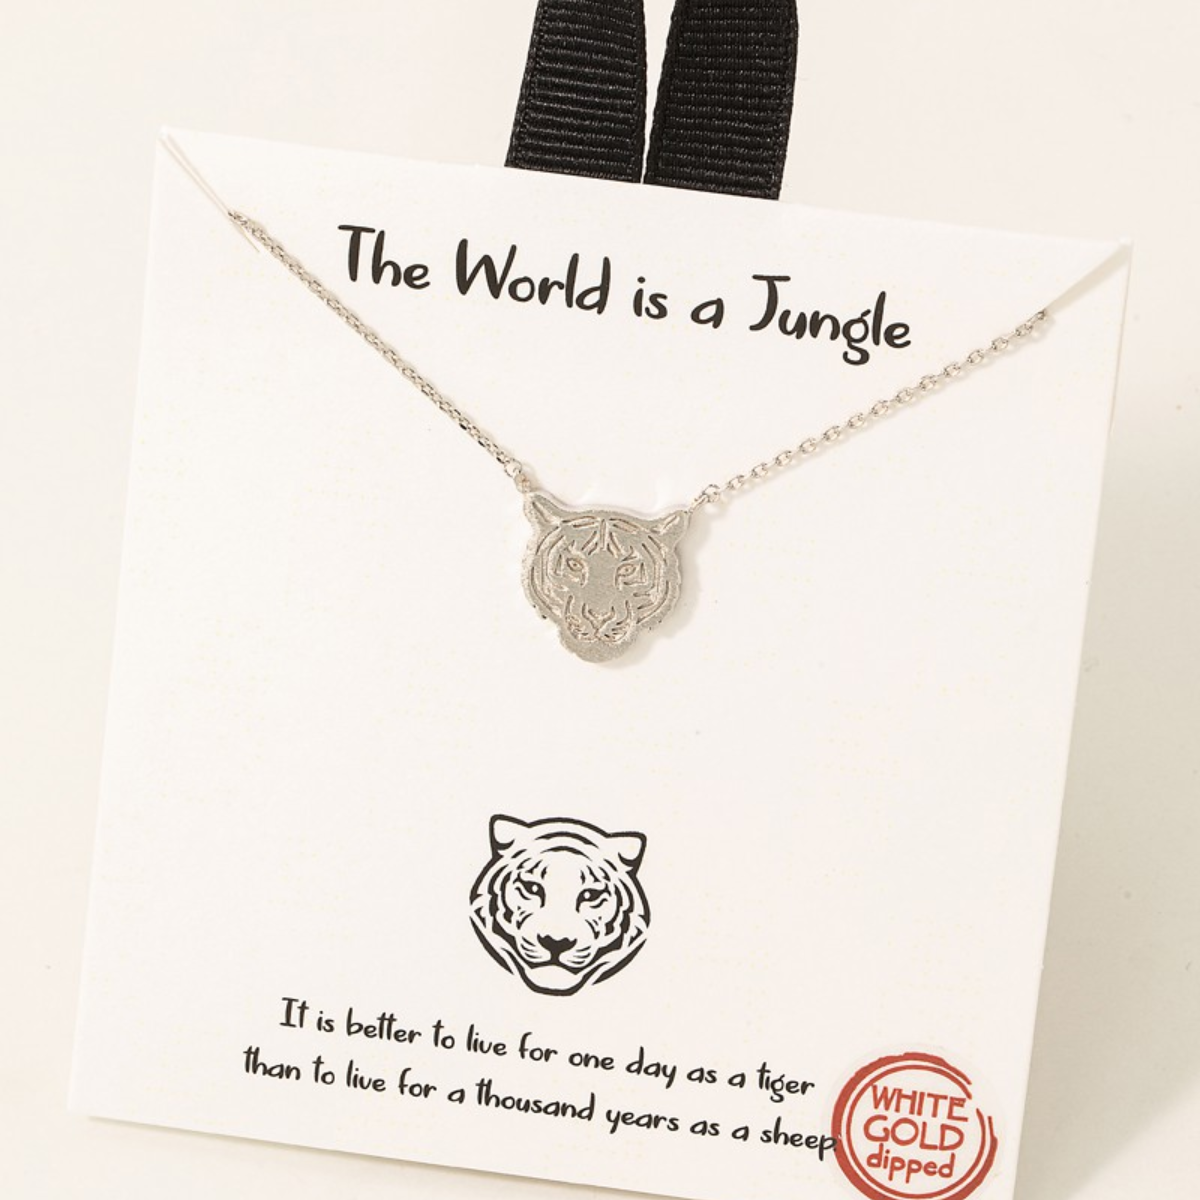 A FASHION GO gold-dipped tiger head pendant necklace displayed on a card titled "the world is a jungle," accompanied by an inspirational quote.